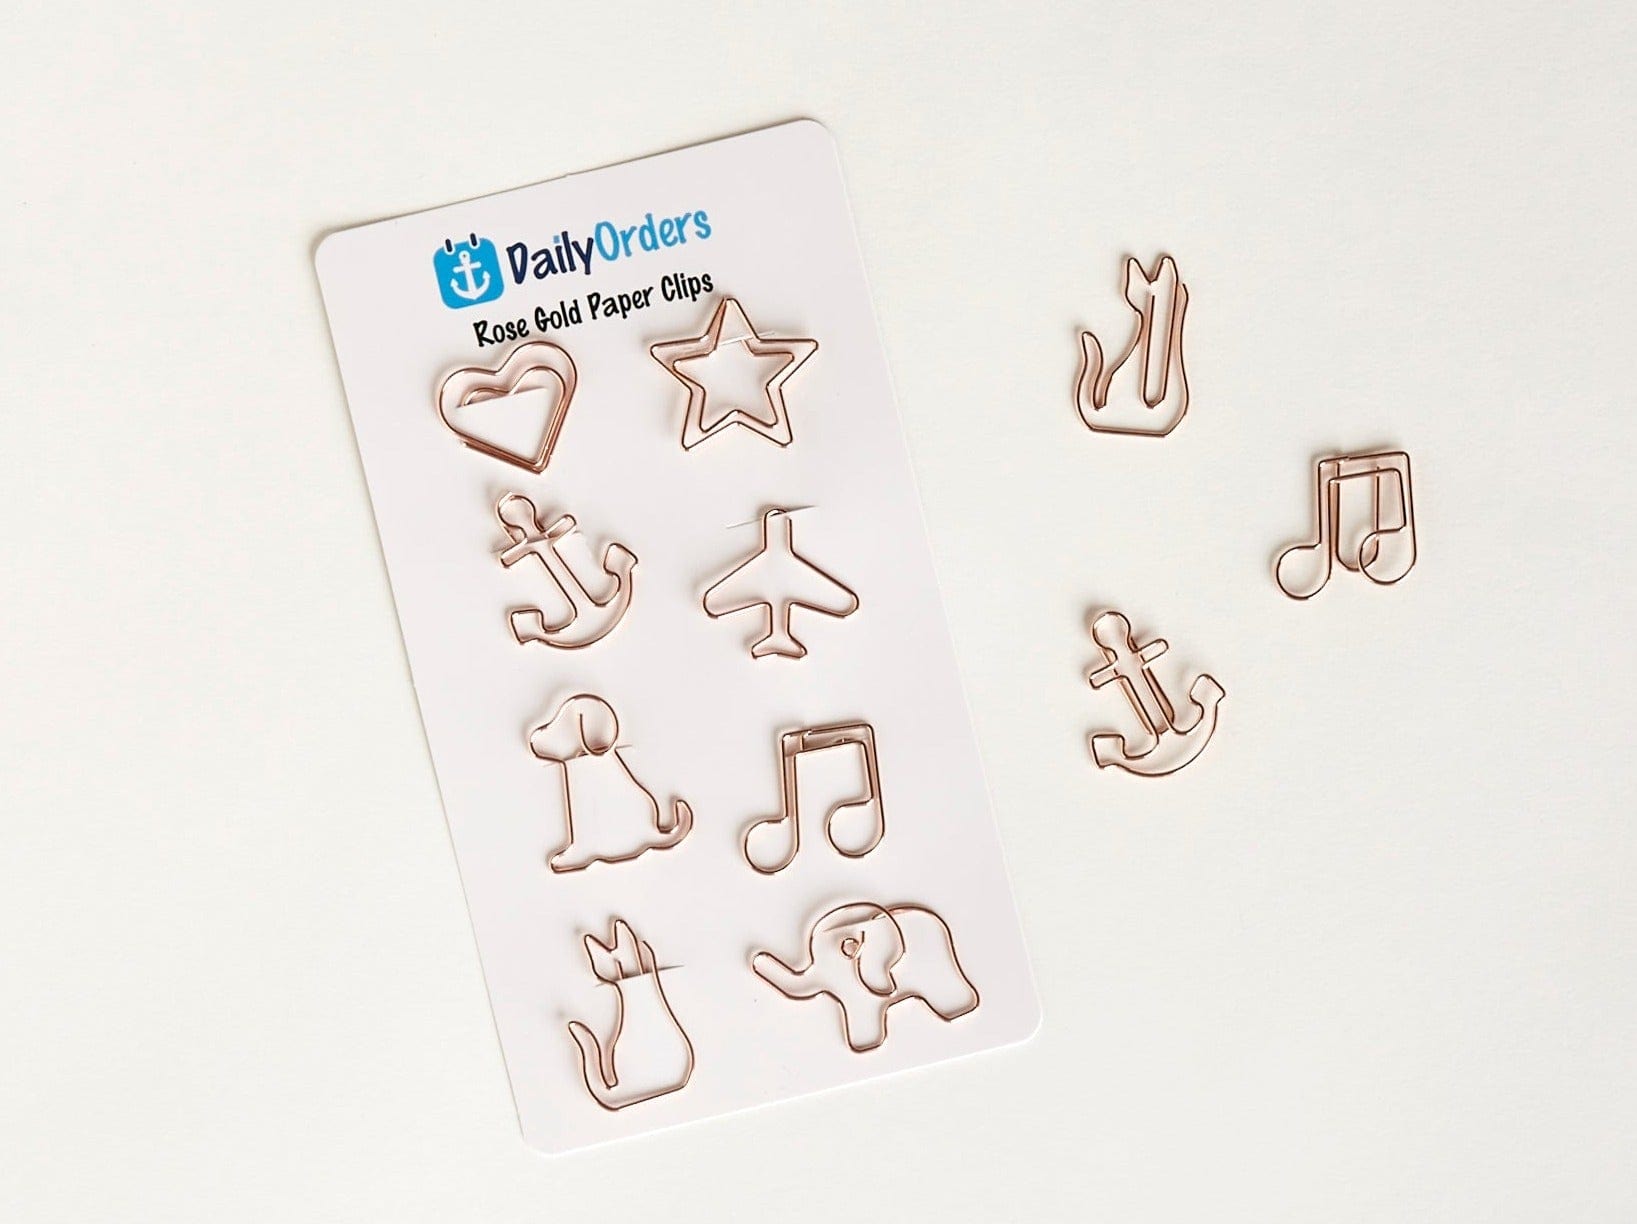 Daily Orders Paper Clips Rose Gold Paper Clips - Set of 8